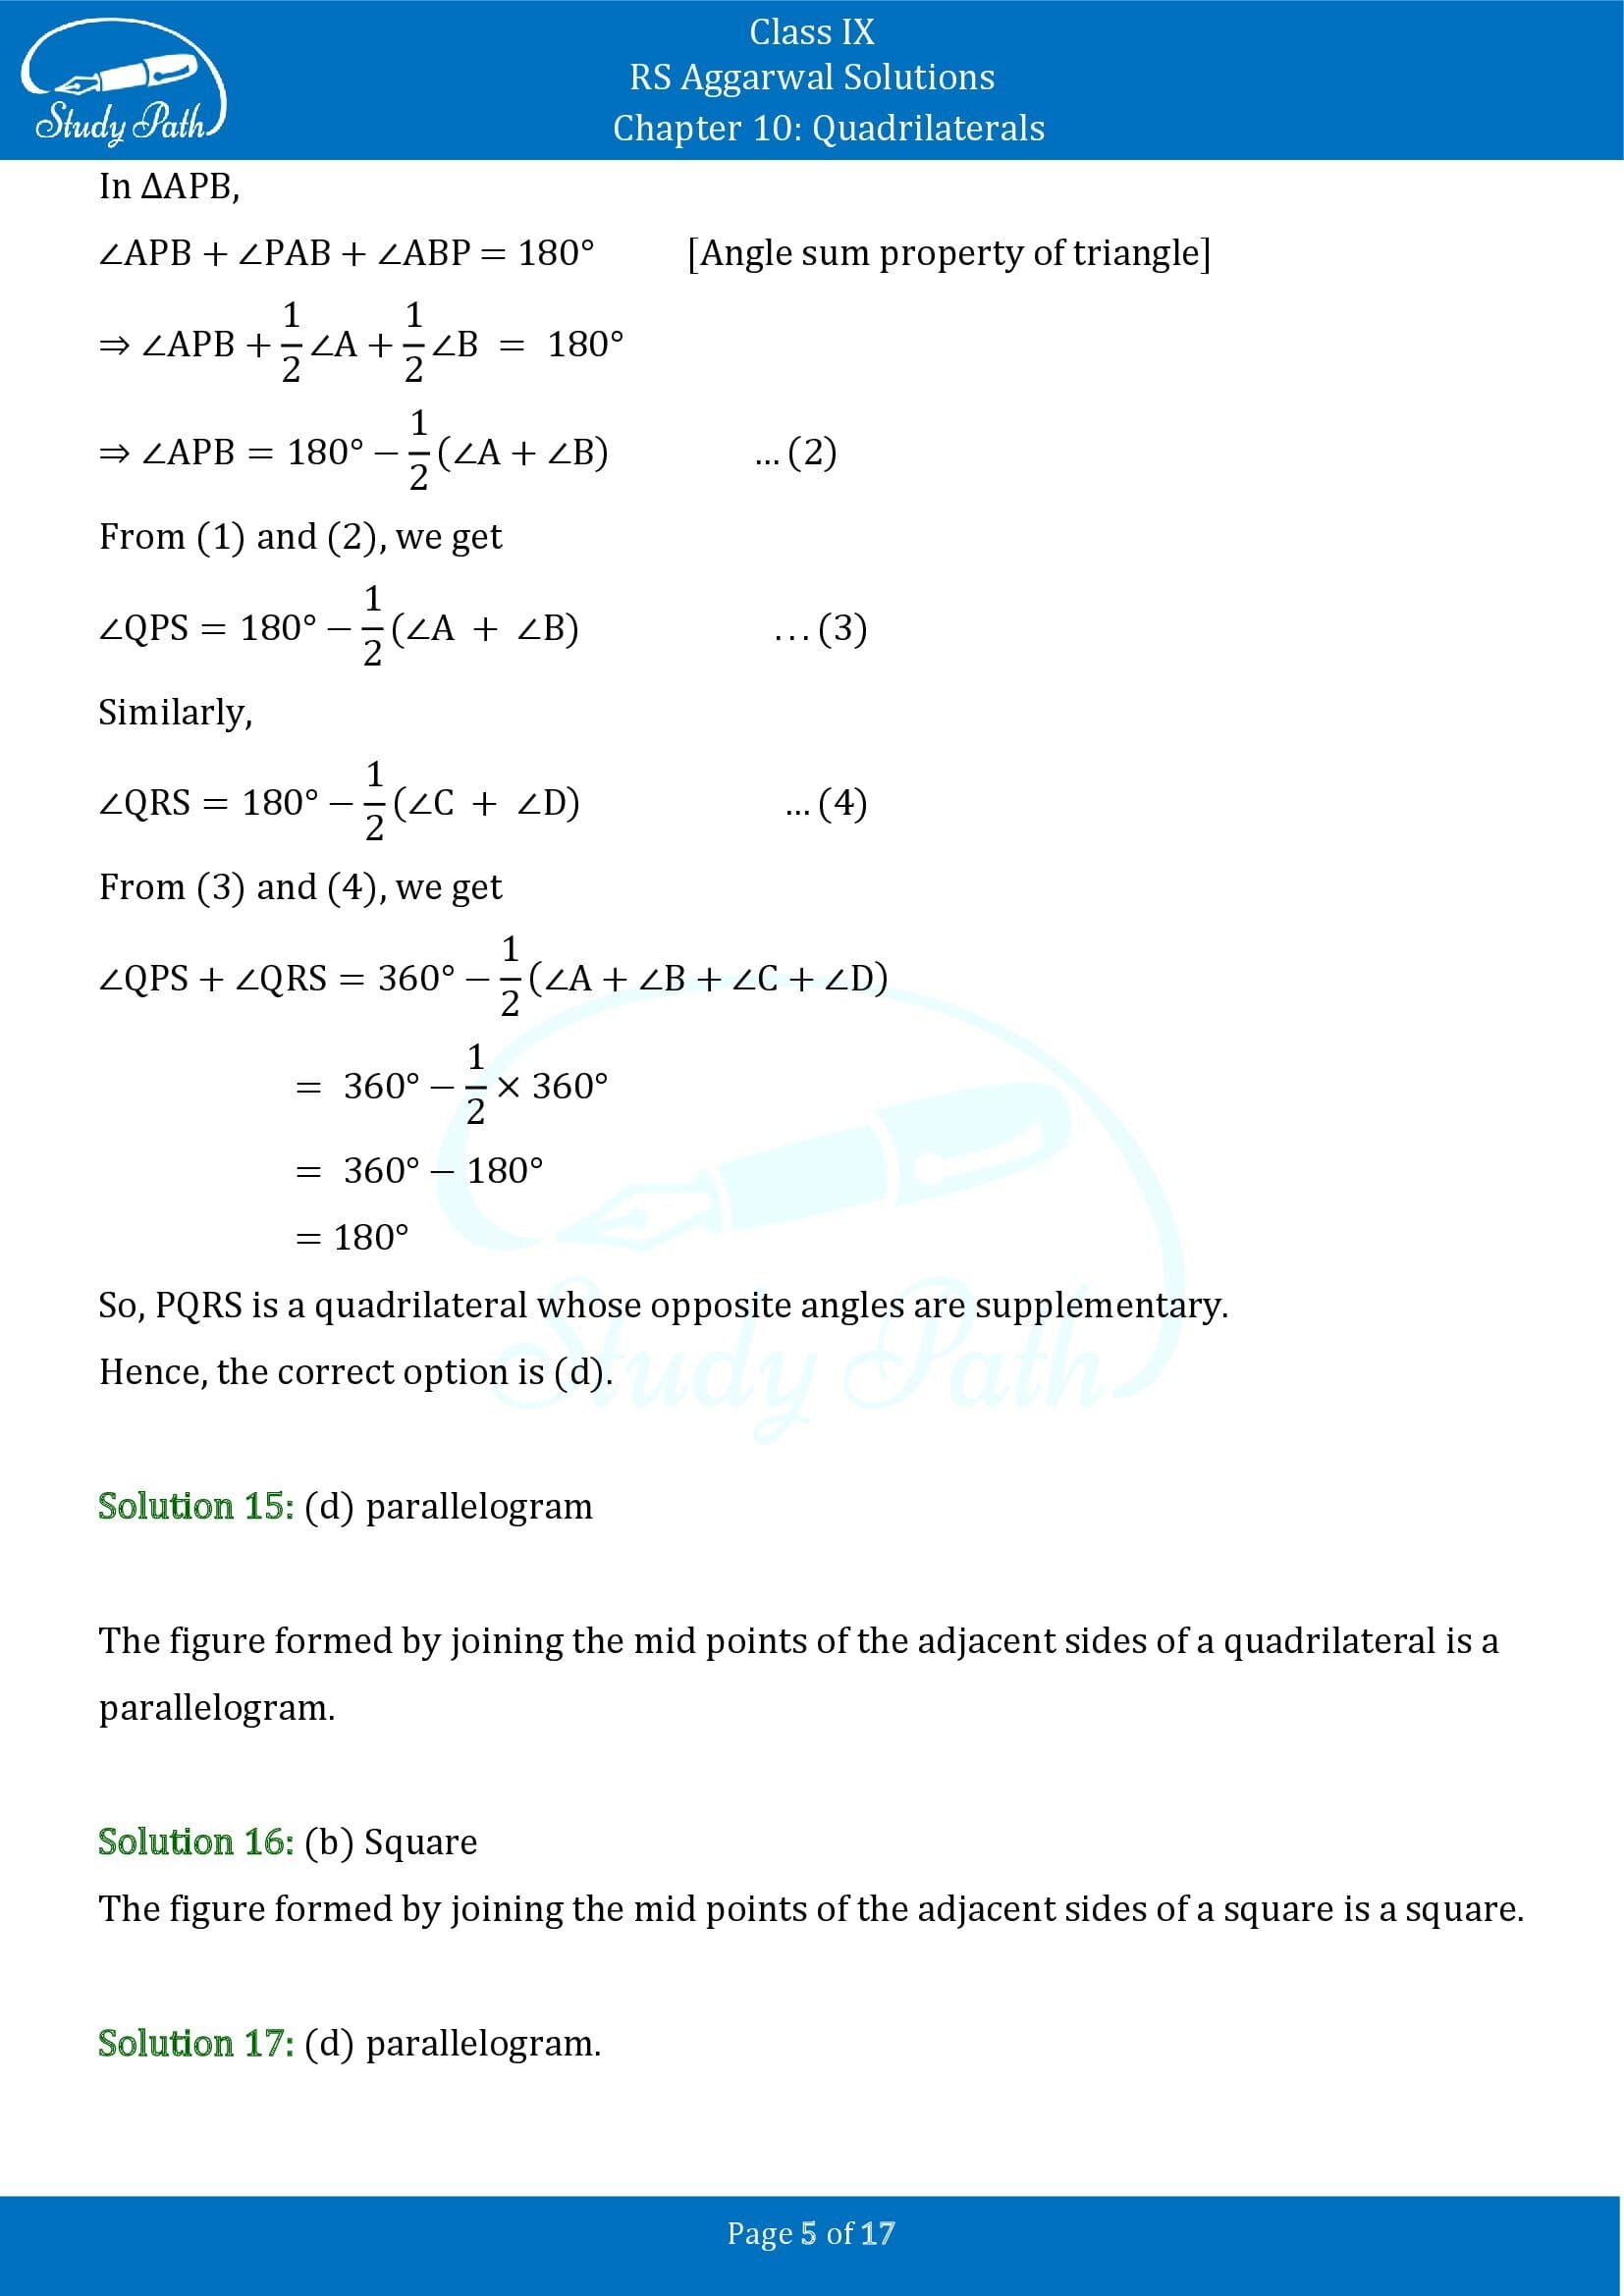 RS Aggarwal Solutions Class 9 Chapter 10 Quadrilaterals Multiple Choice Questions MCQs 00005